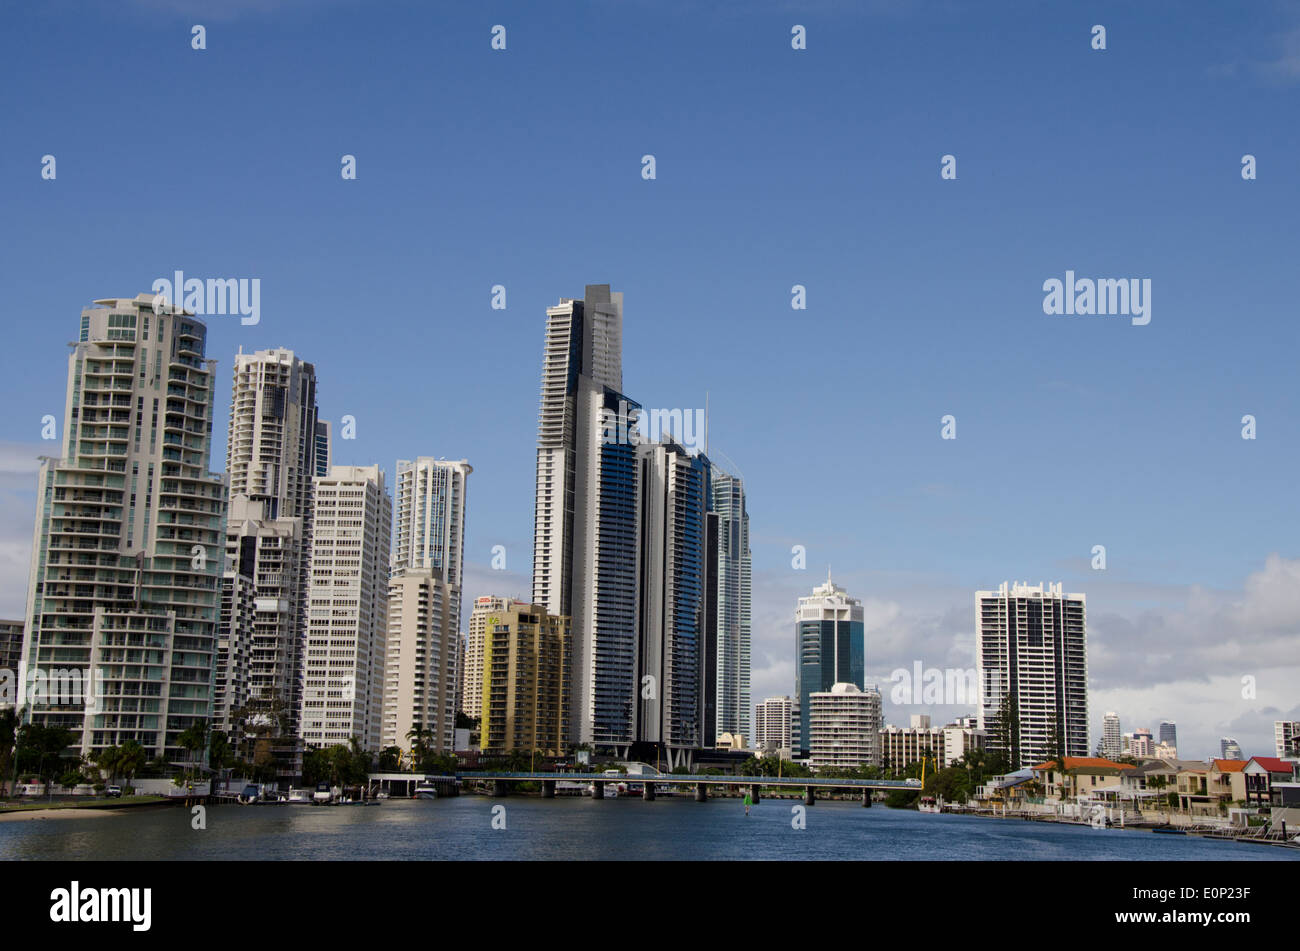 Australia, Queensland, Gold Coast. Waterfront view of Surfers' Paradise skyline. Stock Photo